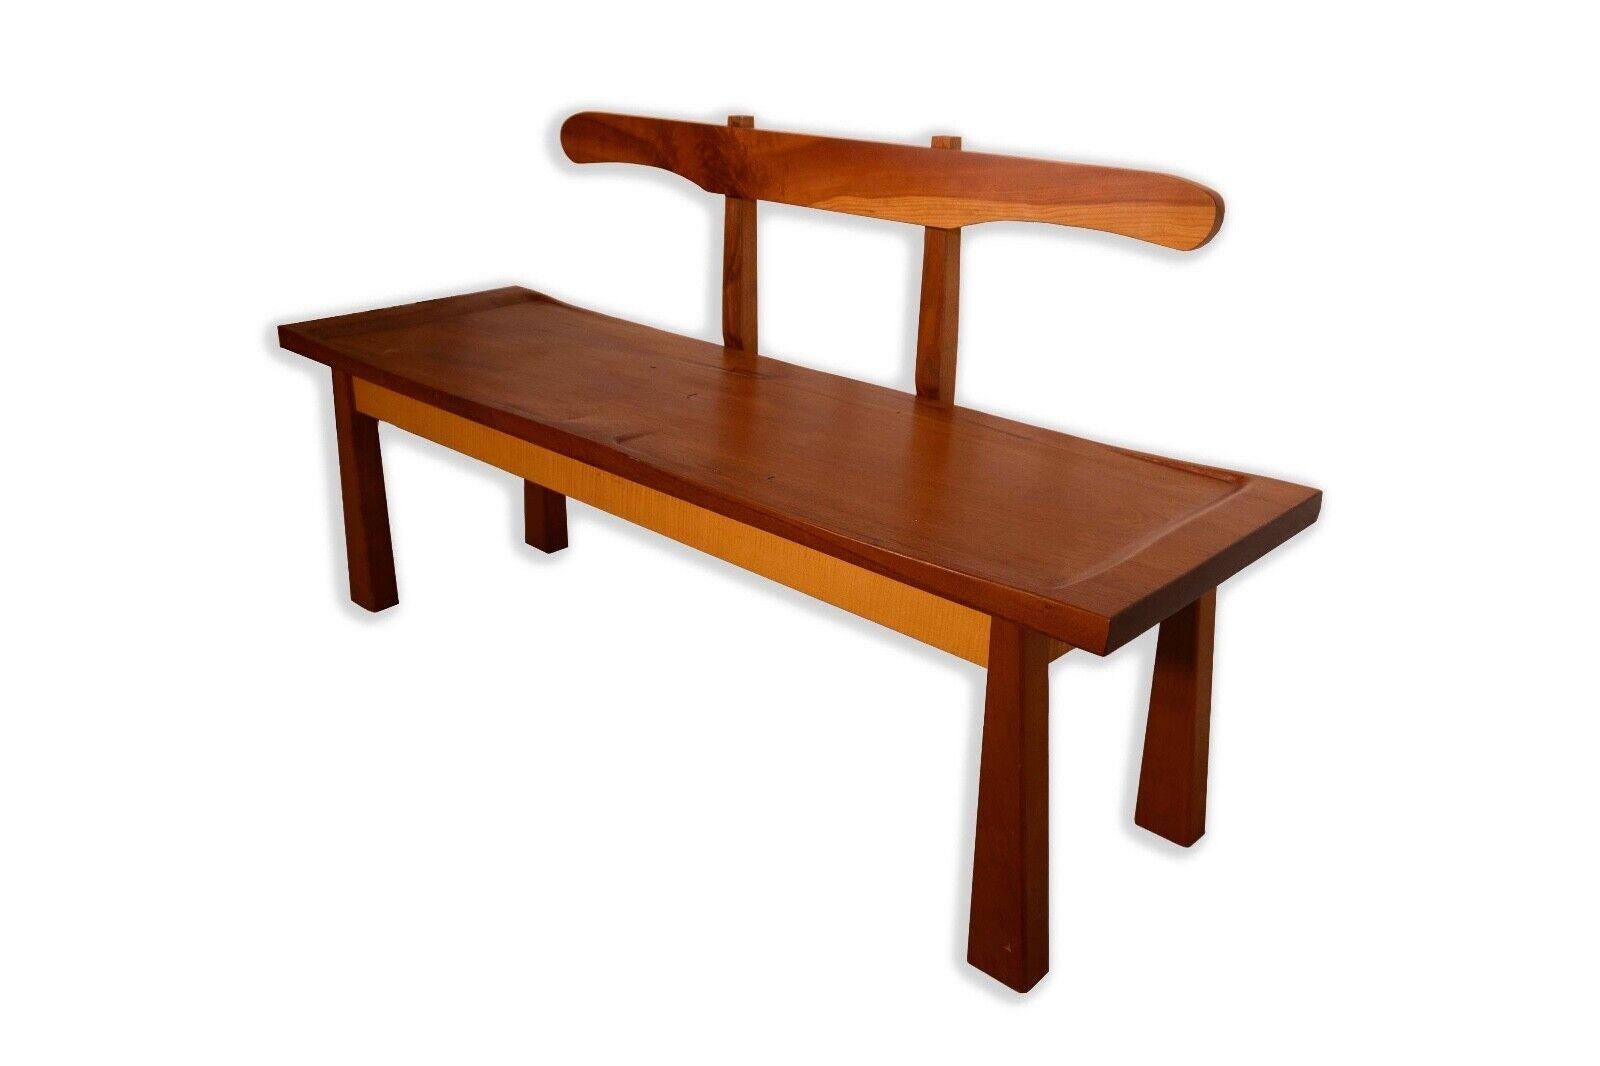 This Nakashima-styled wooden bench with divided seats is a testament to the enduring appeal of Mid Century Modern design. Crafted in the spirit of George Nakashima's iconic furniture, the bench features a beautifully grained wooden construction,